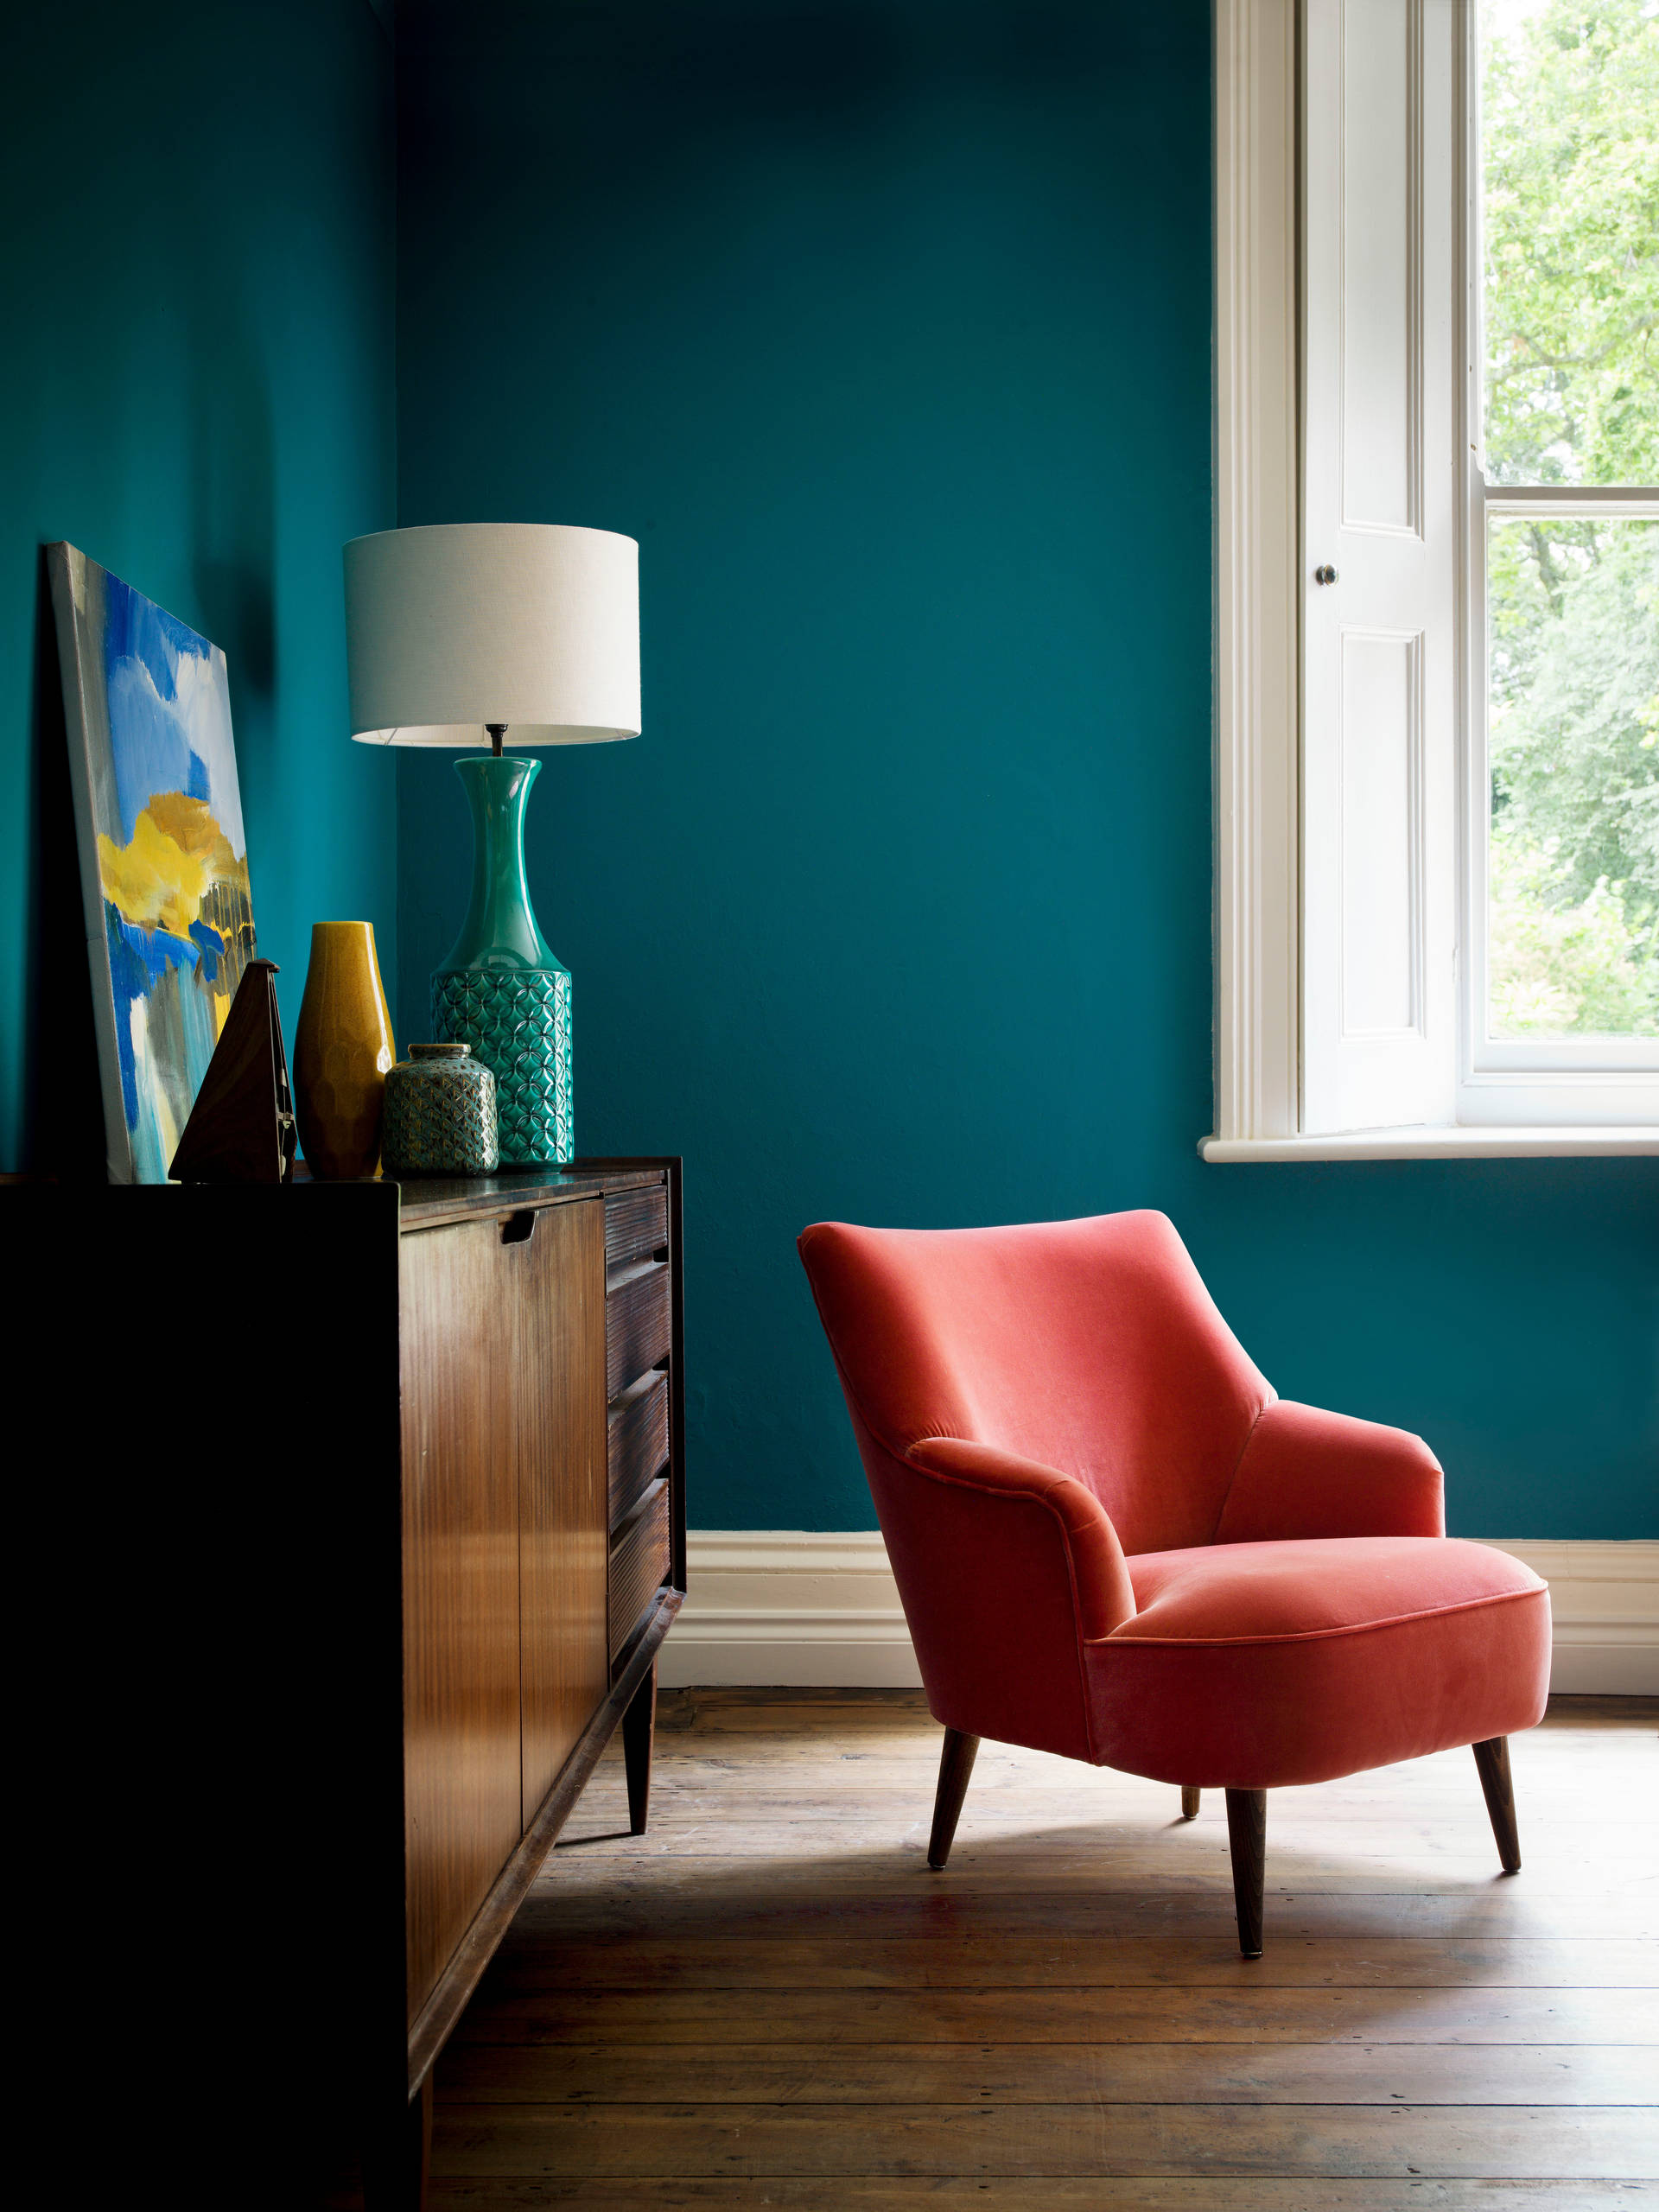 How To Mix Teal And Terracotta Houzz Uk, Teal Living Rooms Uk